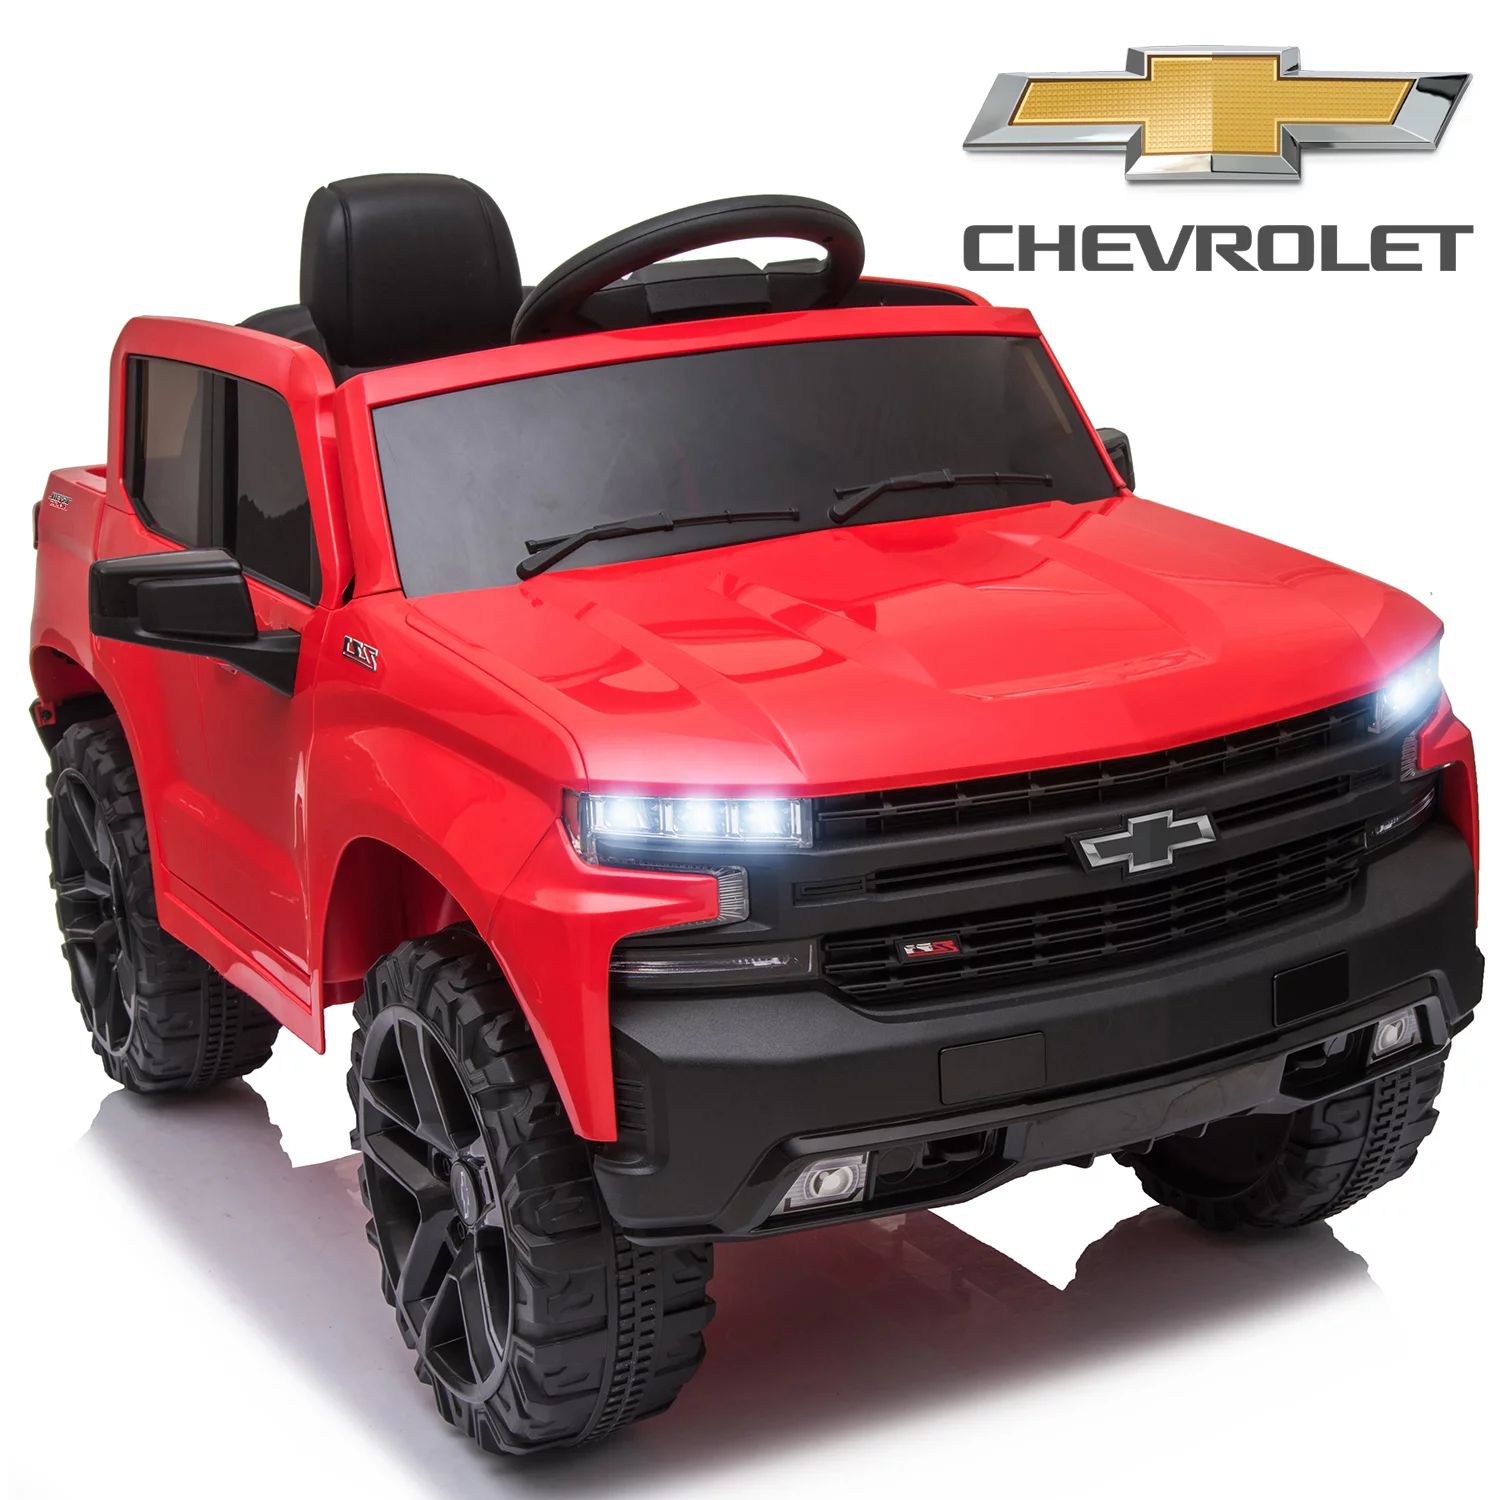 uhomepro Red 12 V Chevrolet Silverado Powered Ride-On with Remote Control | Walmart (US)